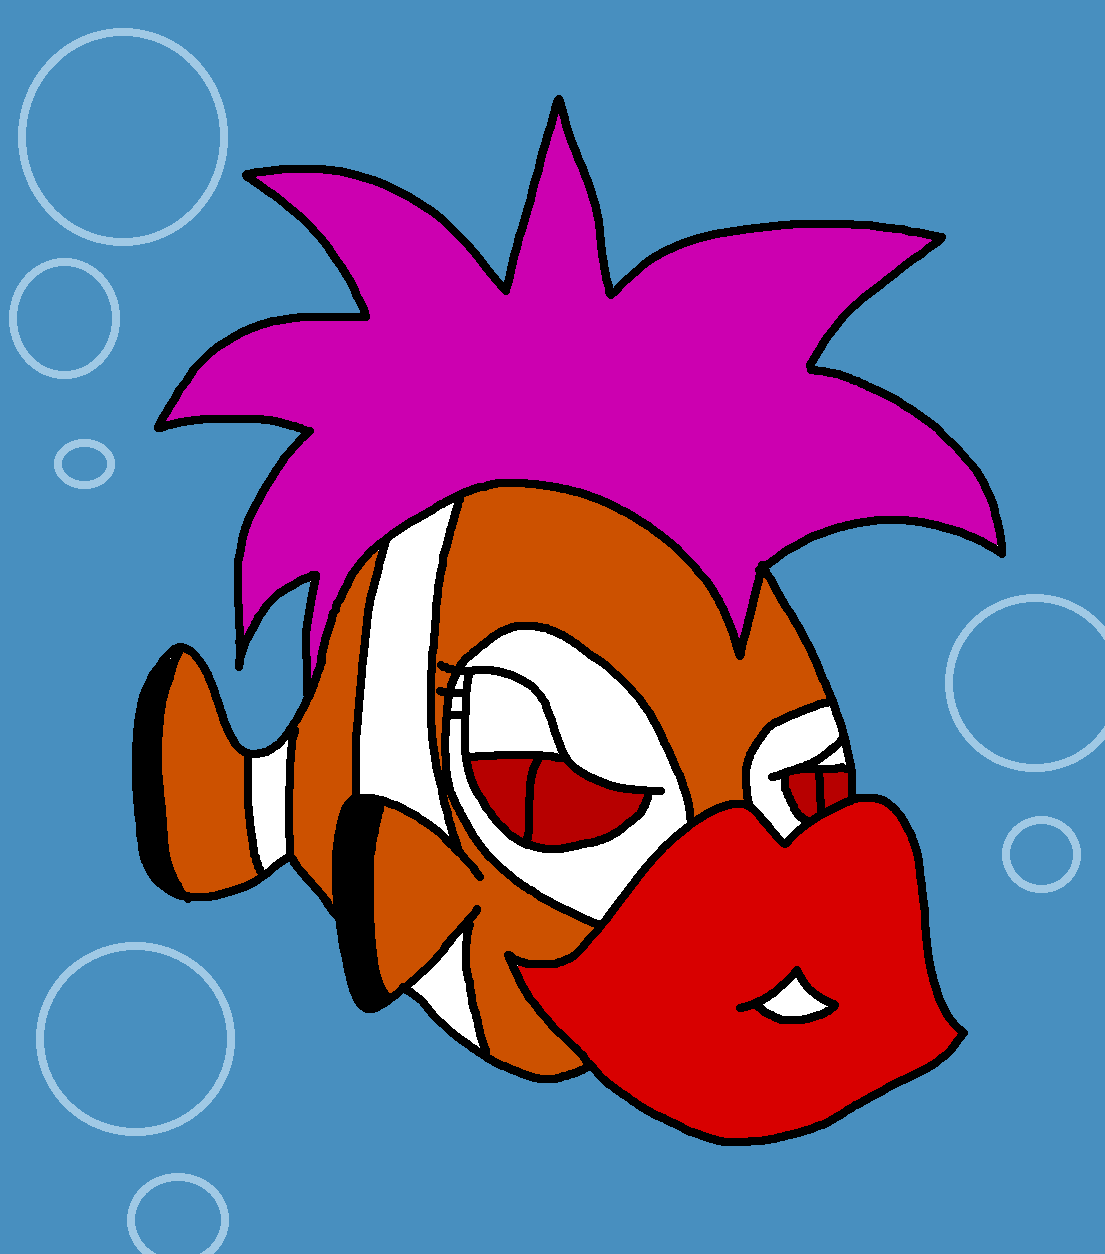 Clown Fish With Big Ugly Lips by richsquid1996 on DeviantArt